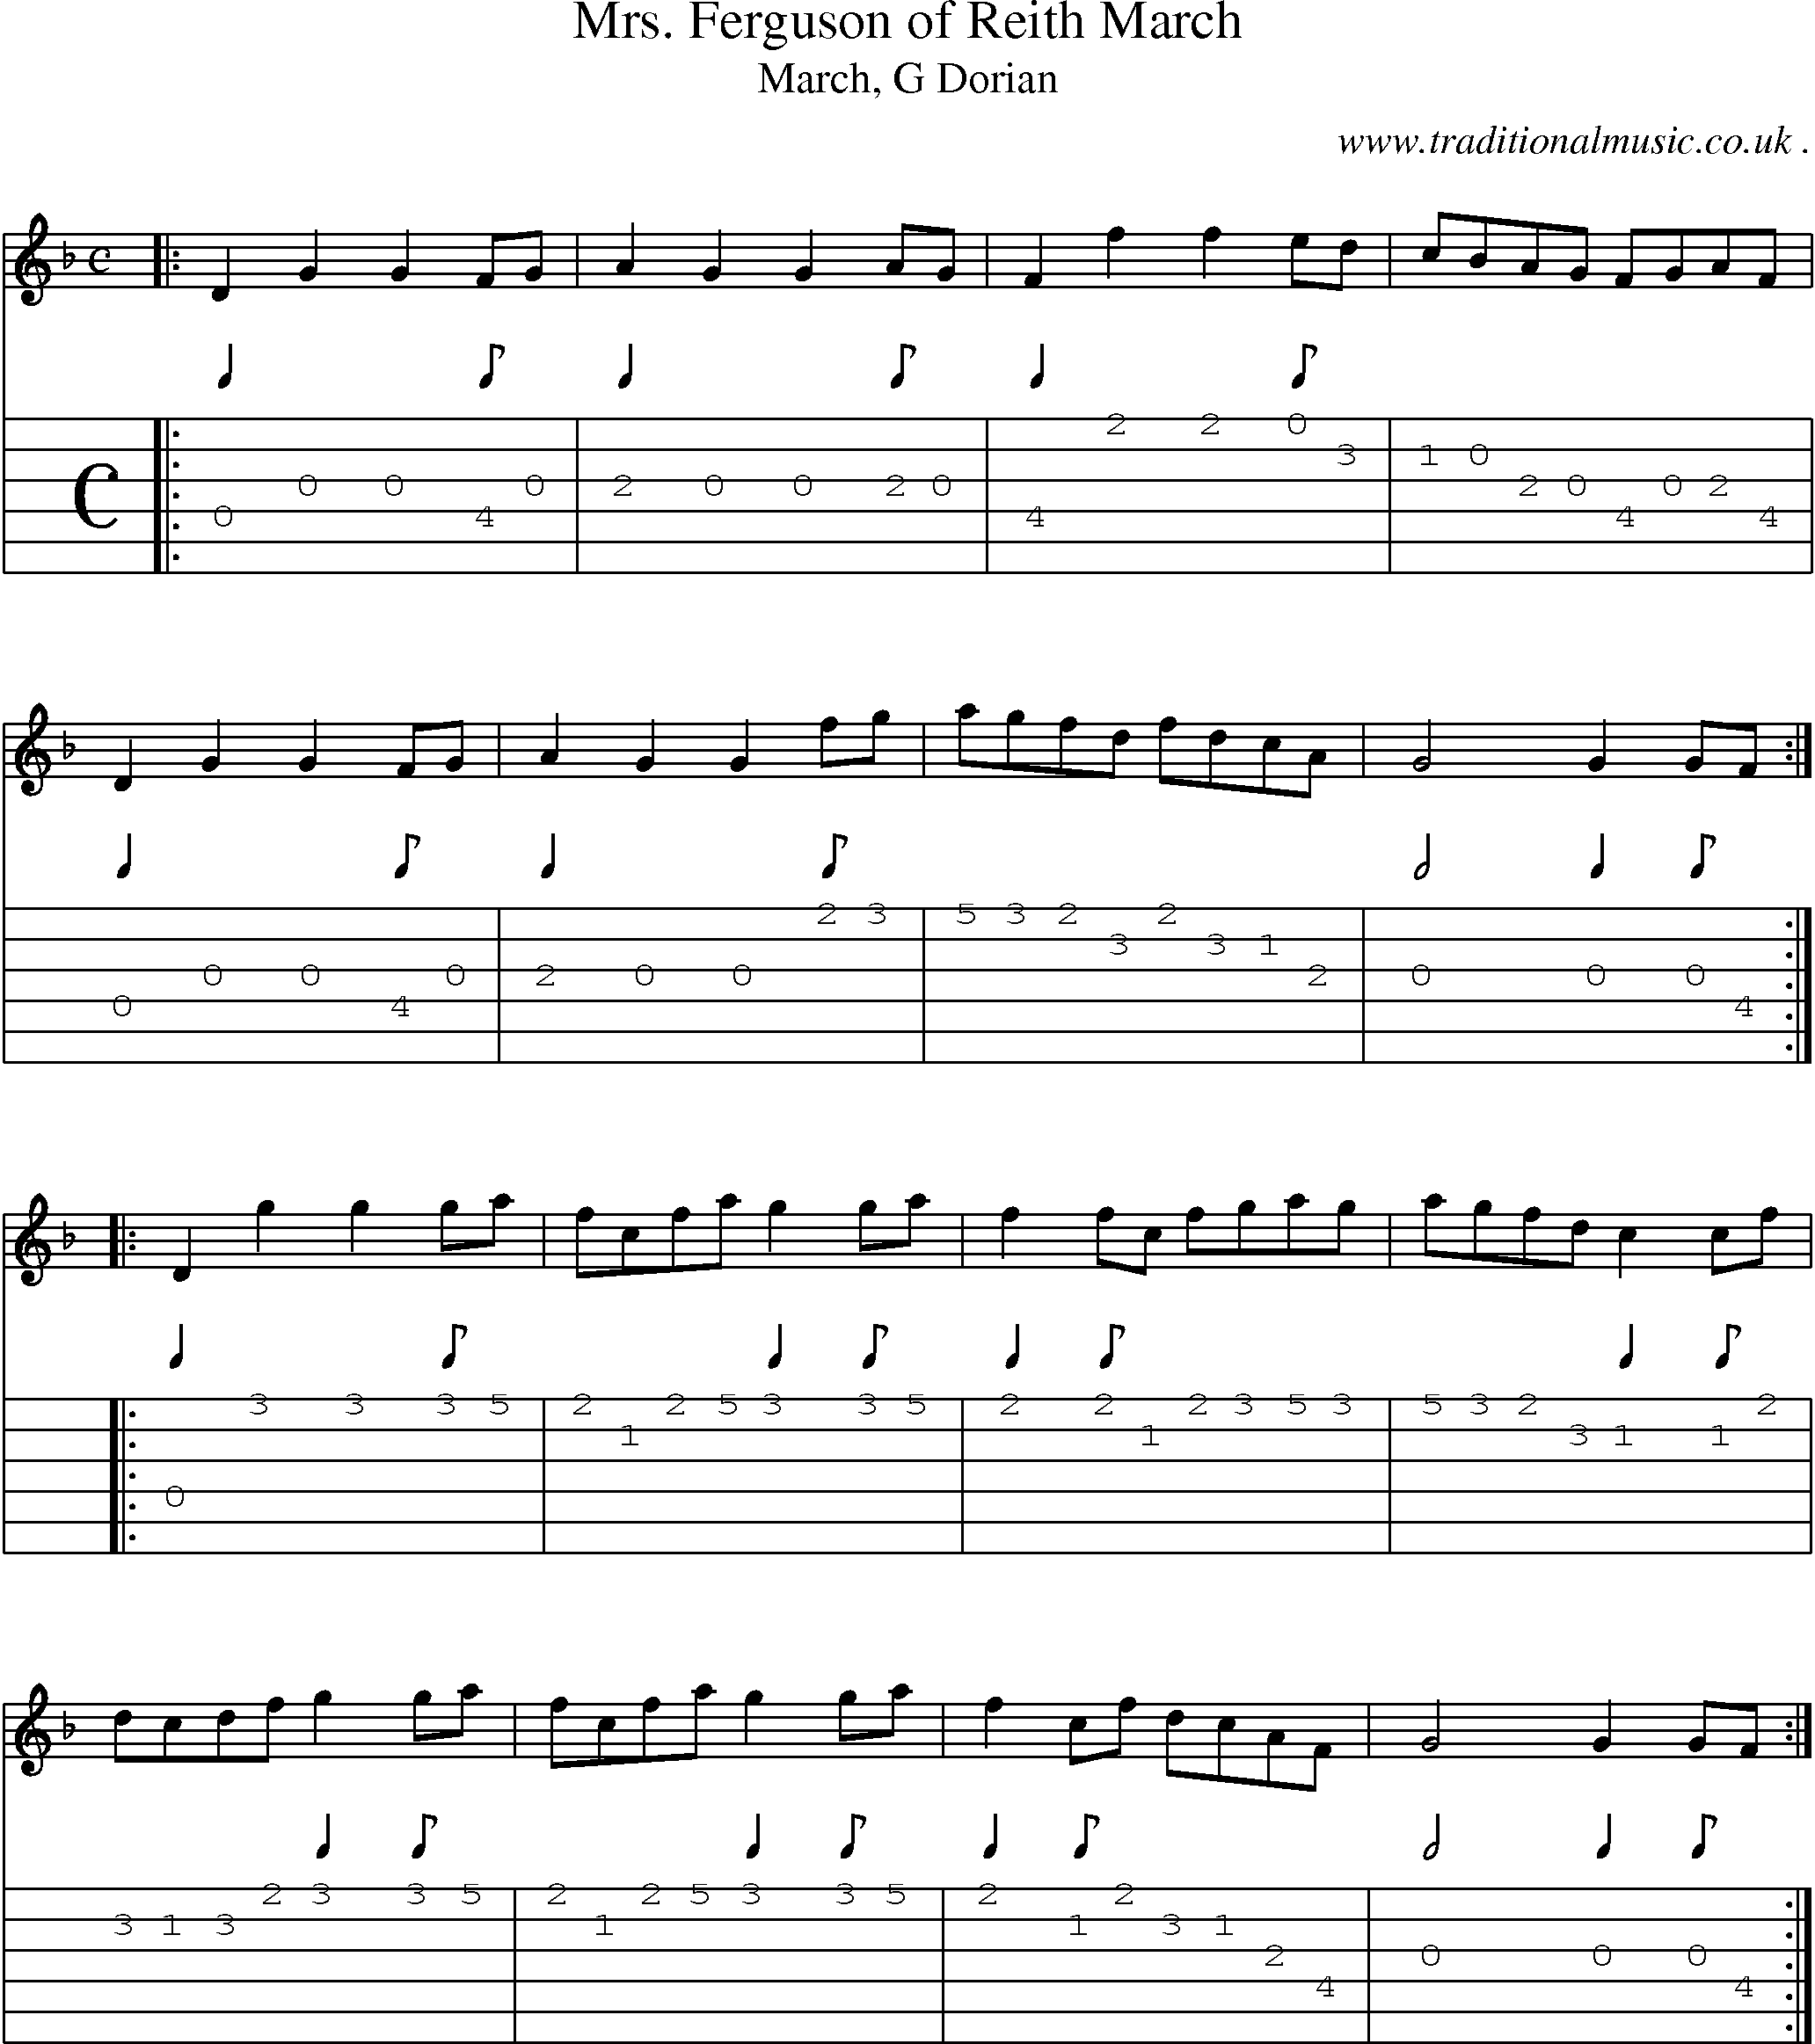 Sheet-music  score, Chords and Guitar Tabs for Mrs Ferguson Of Reith March